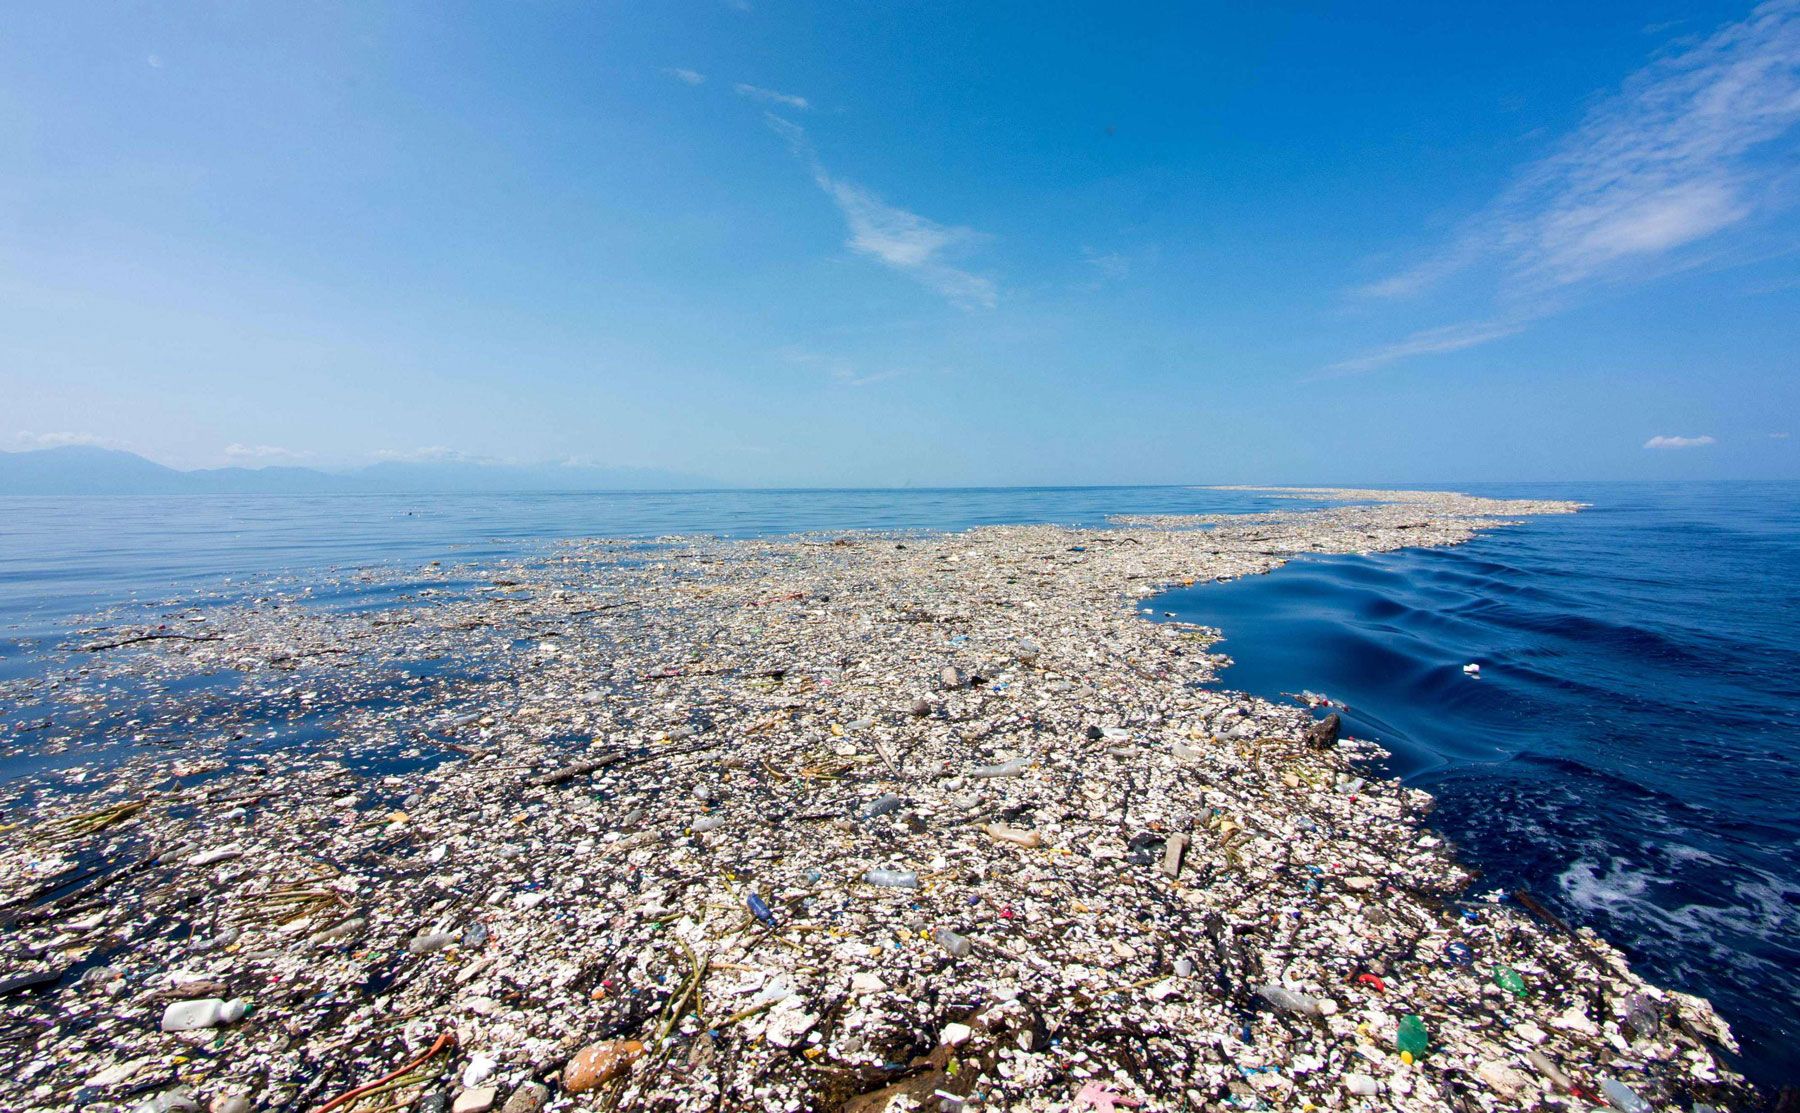 A photo of a build-up of plastic in the ocean